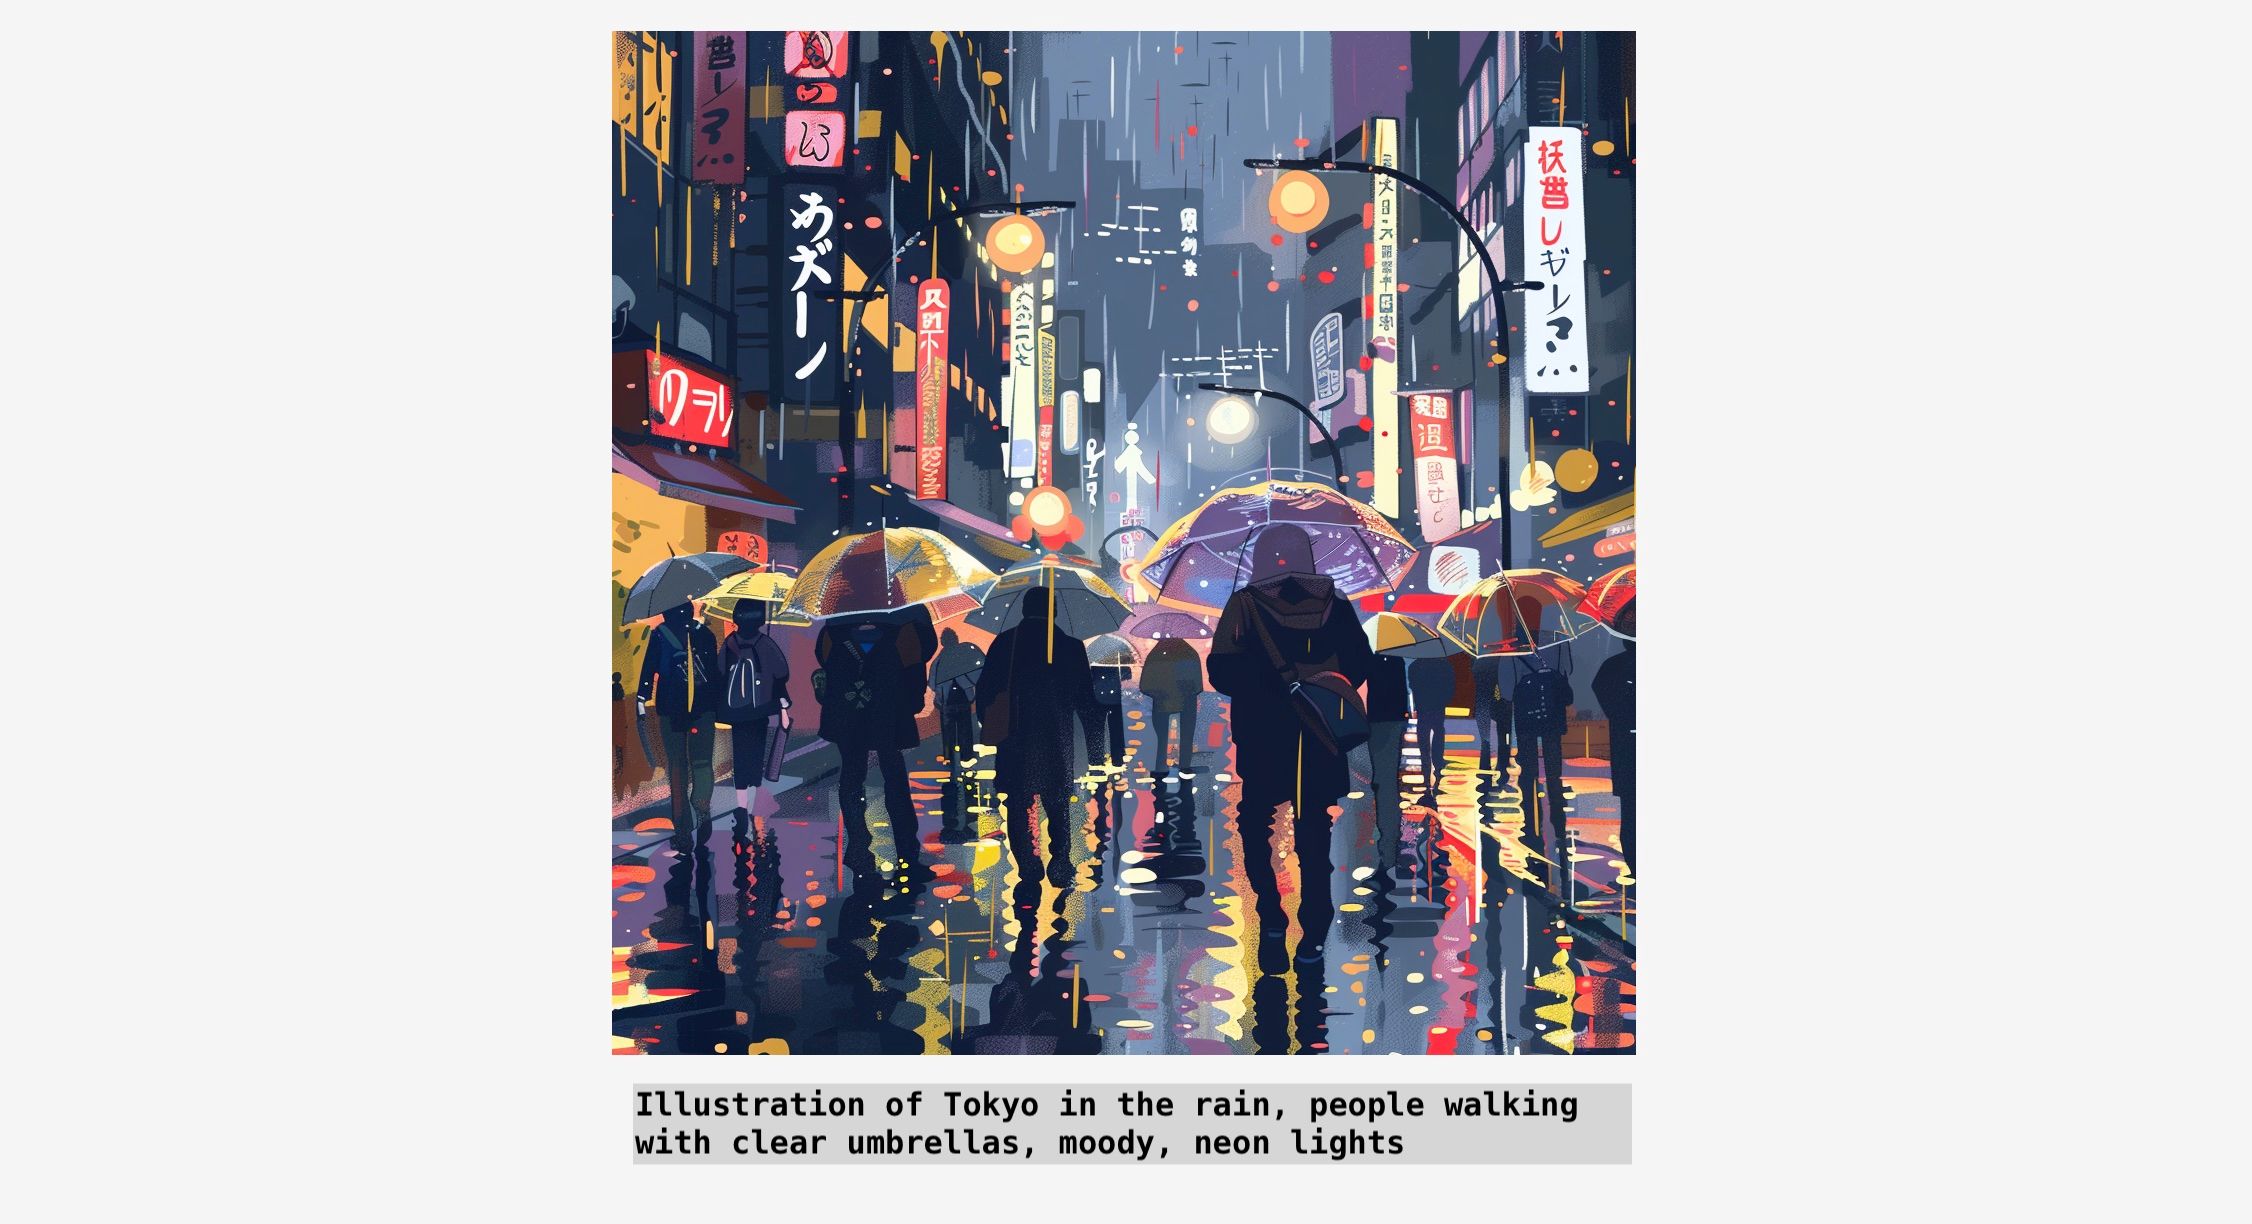 Illustrated image of colorful Tokyo street made using Midjourney